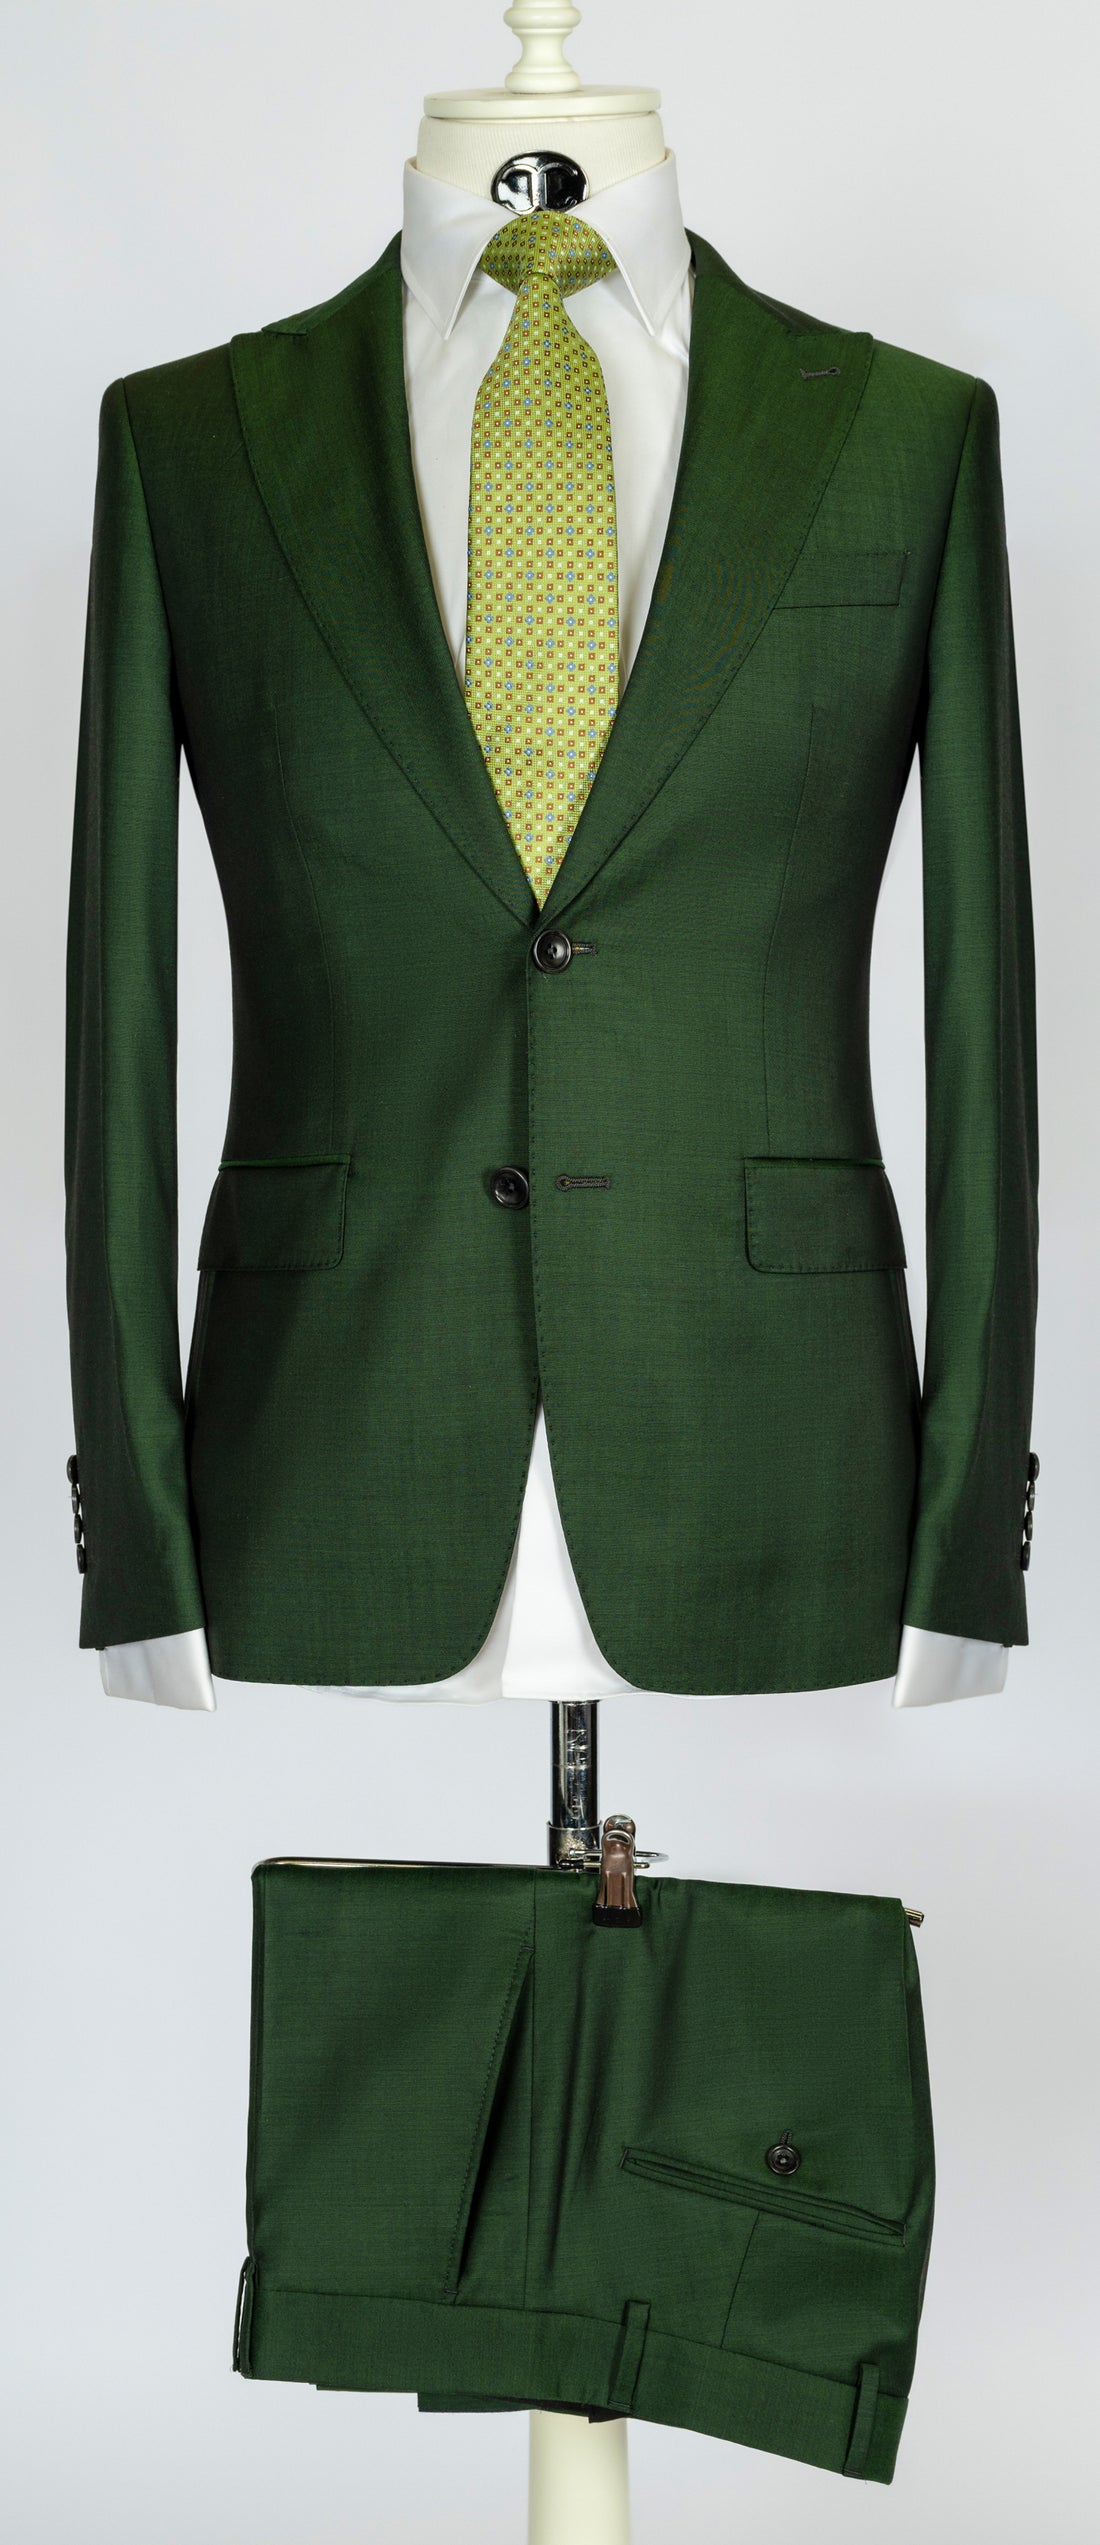 Tollegno - Forest green classic 2-piece slim fit suit